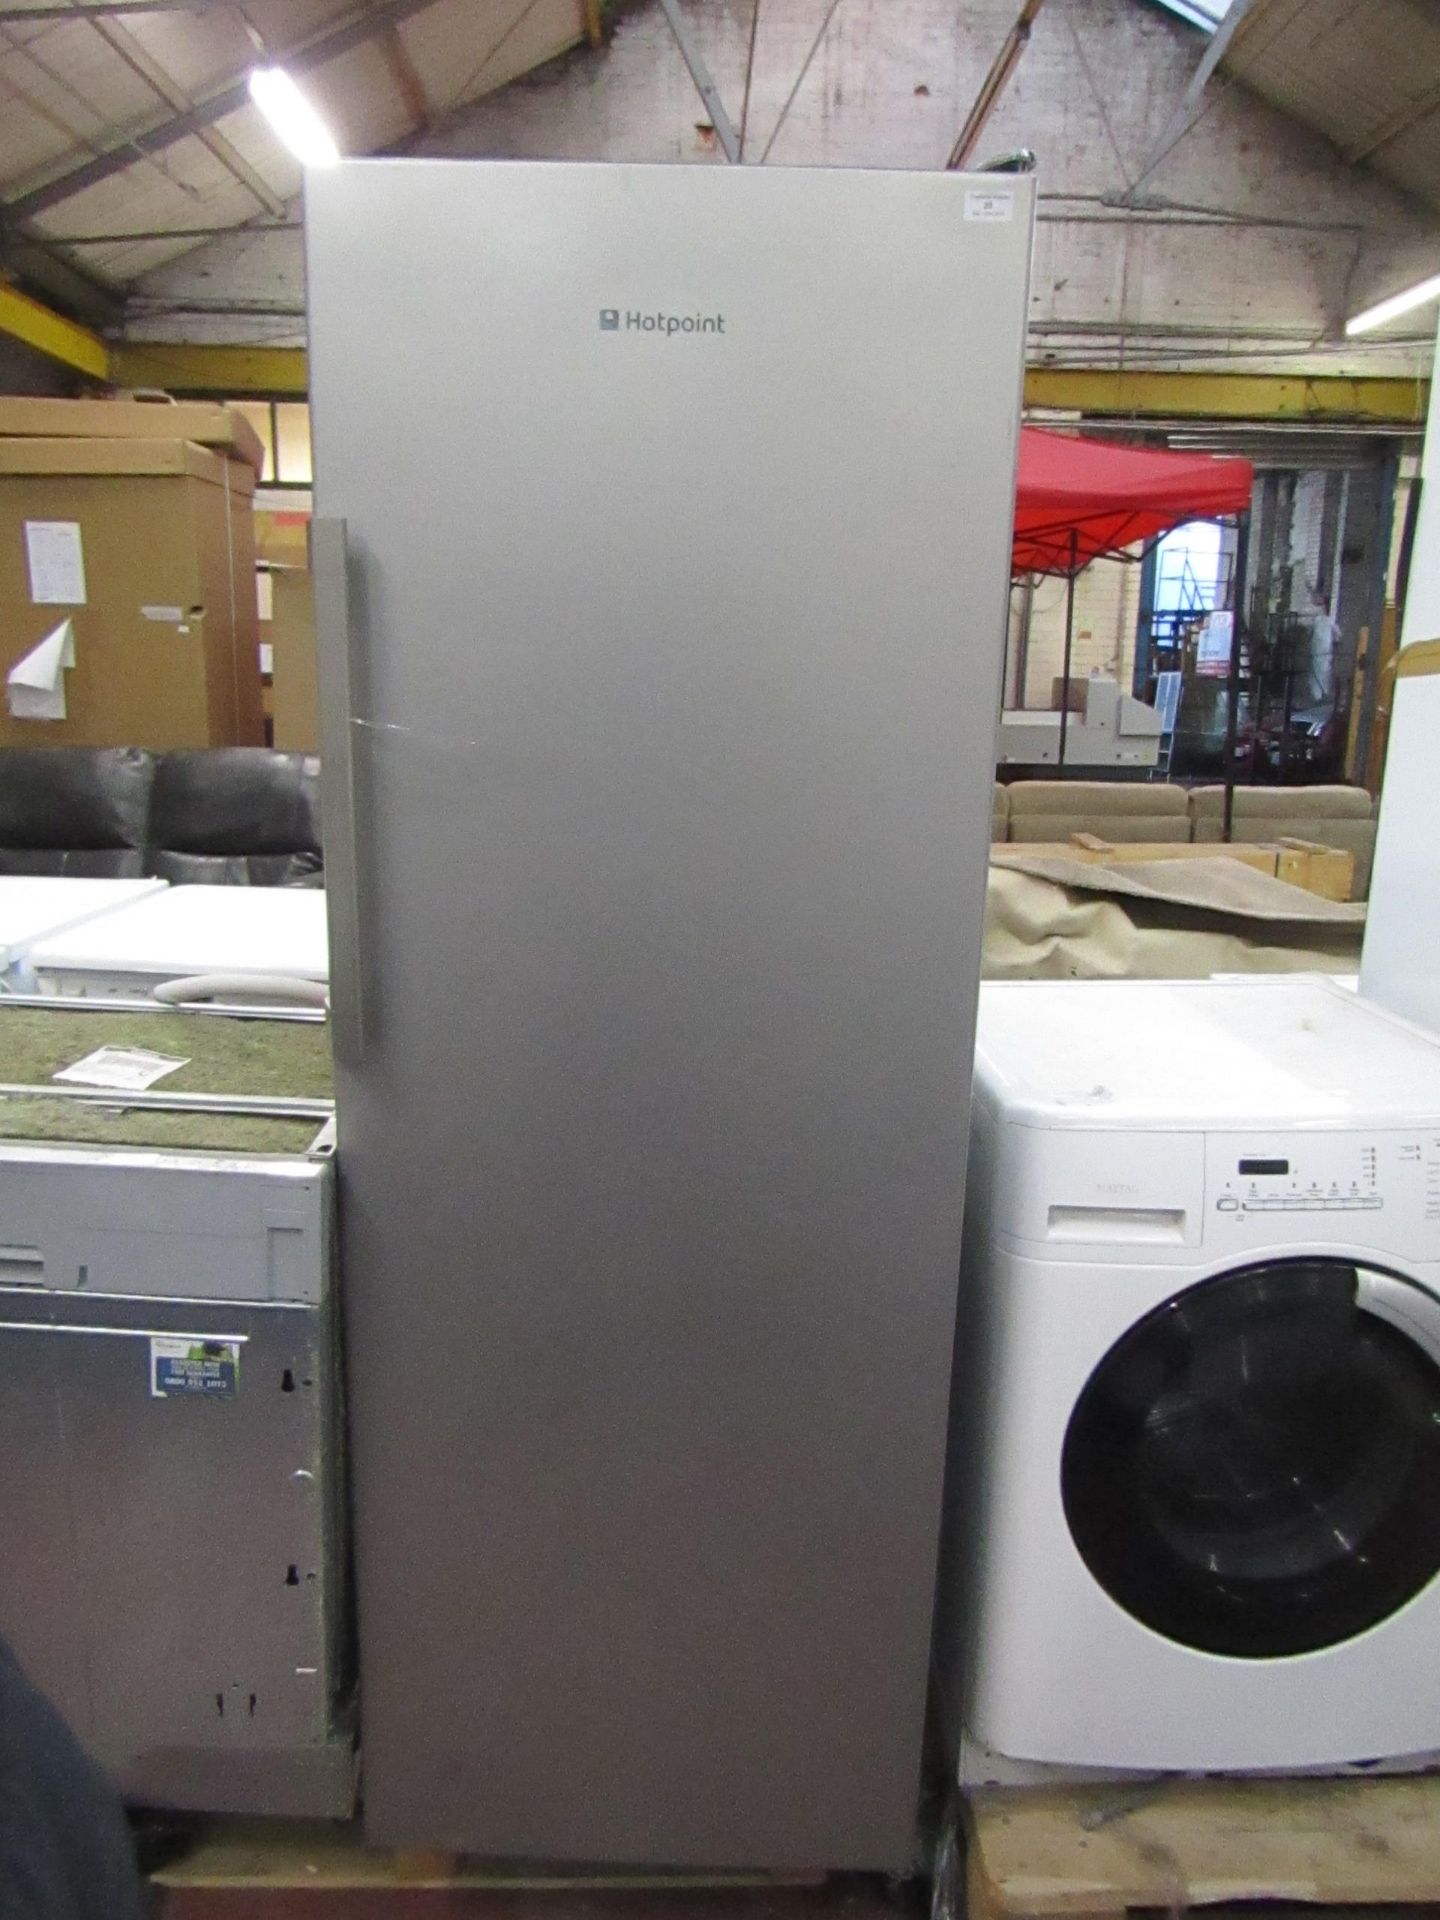 Hotpoint RE326A tall free standing fridge, tested working.